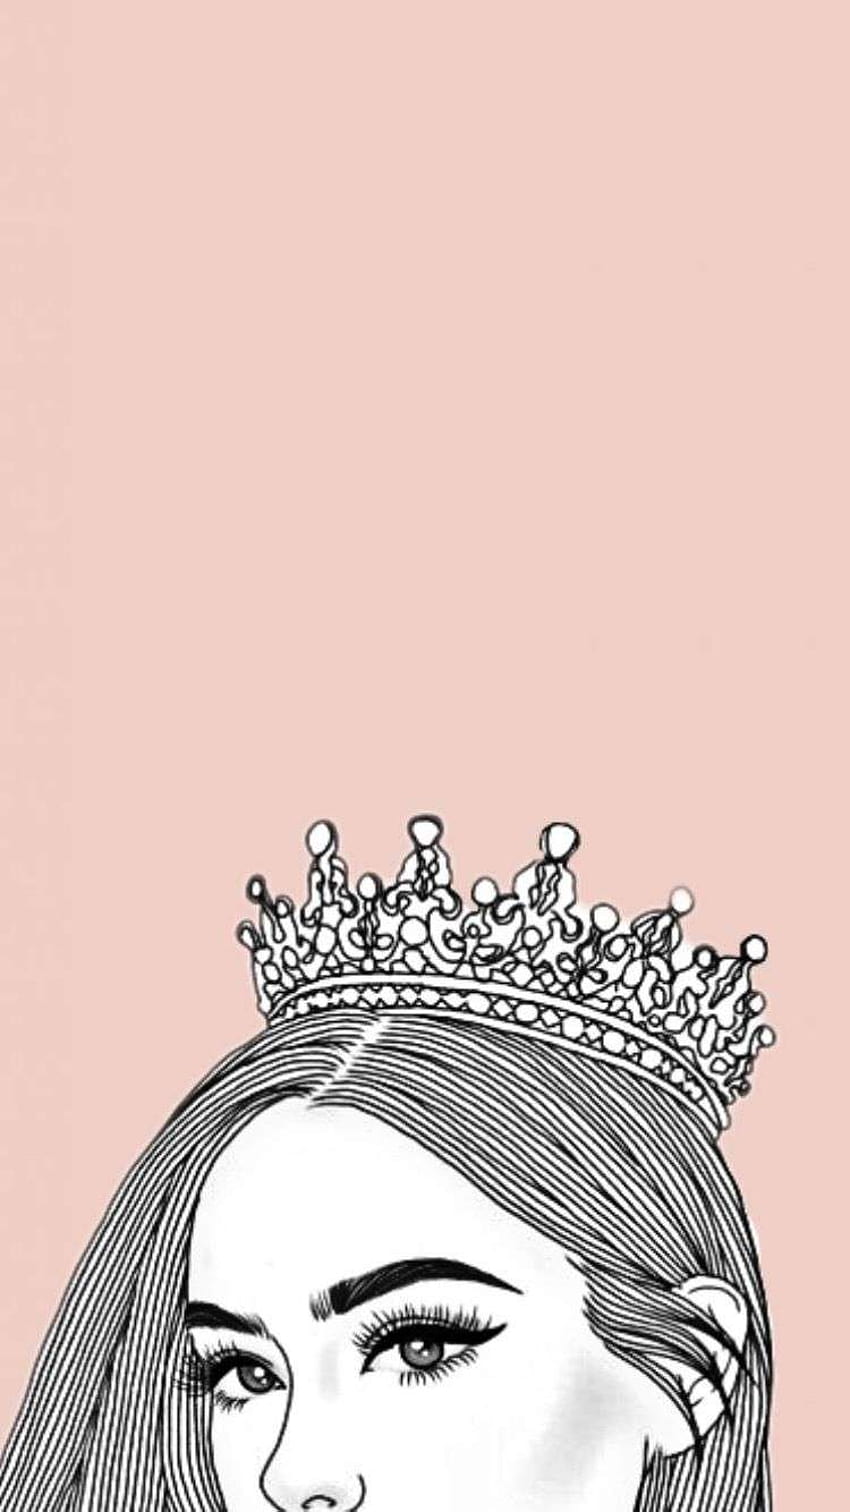 HD wallpaper woman holding crown on head queen crowning royalty luxury   Wallpaper Flare